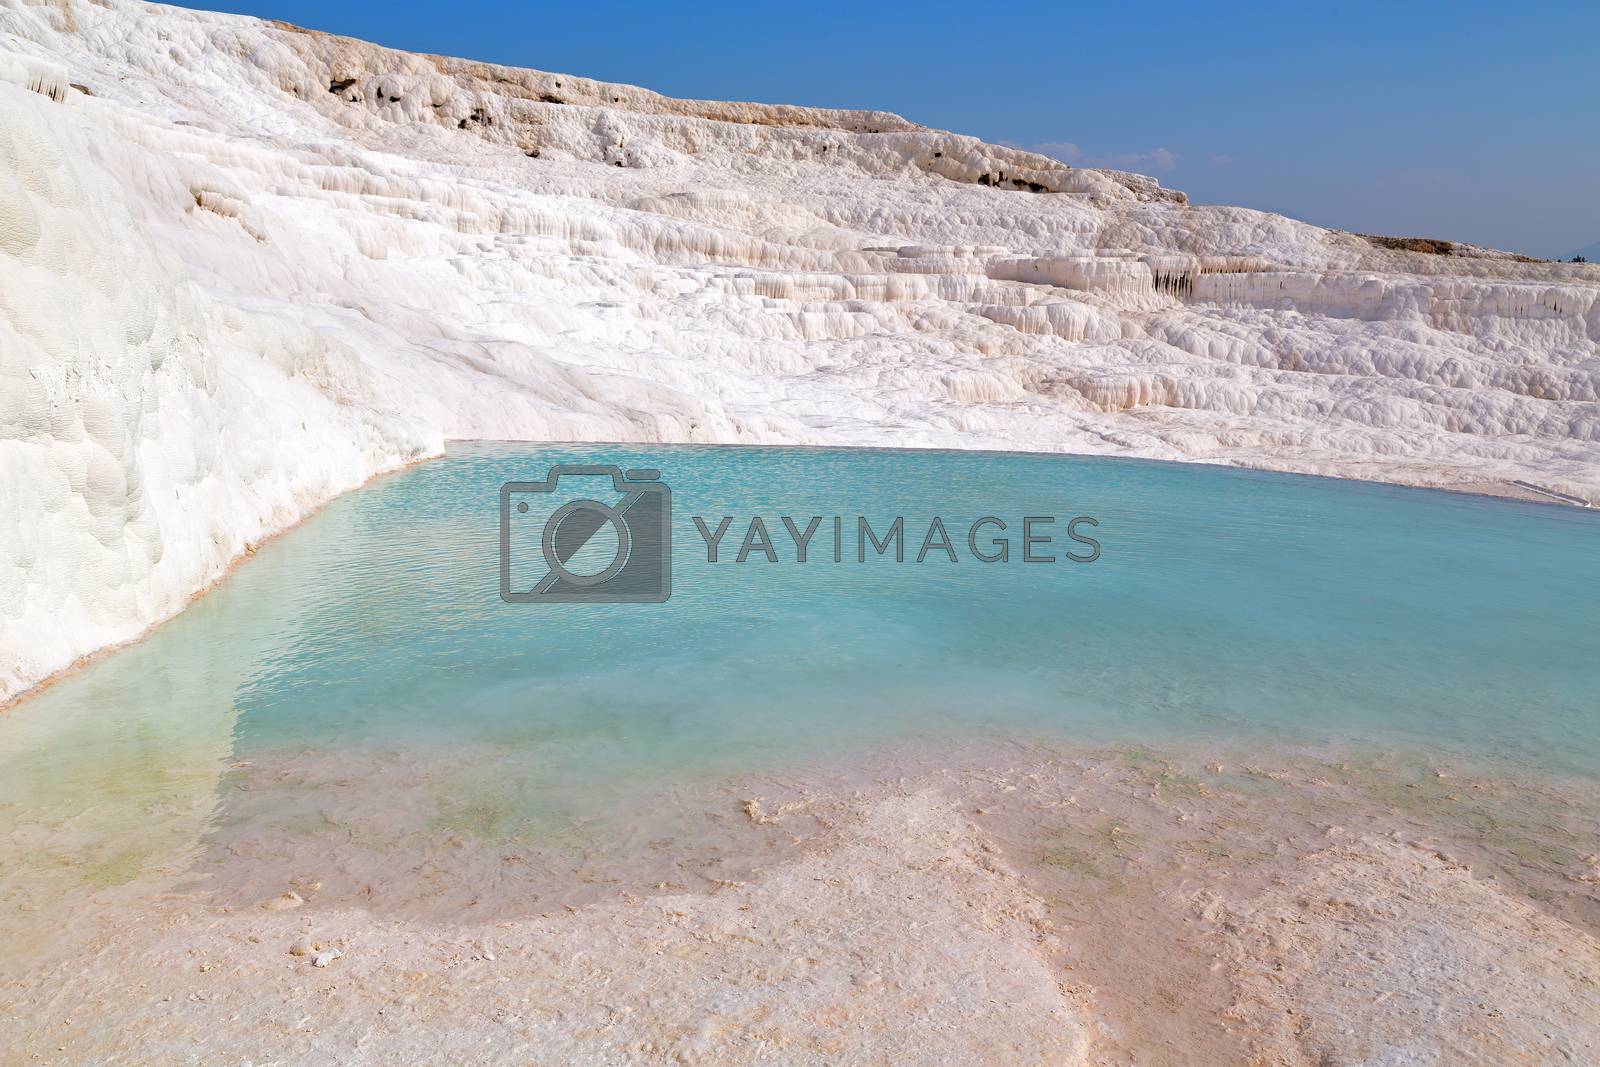 Royalty free image of calcium bath and travertine unique abstract in  by lkpro